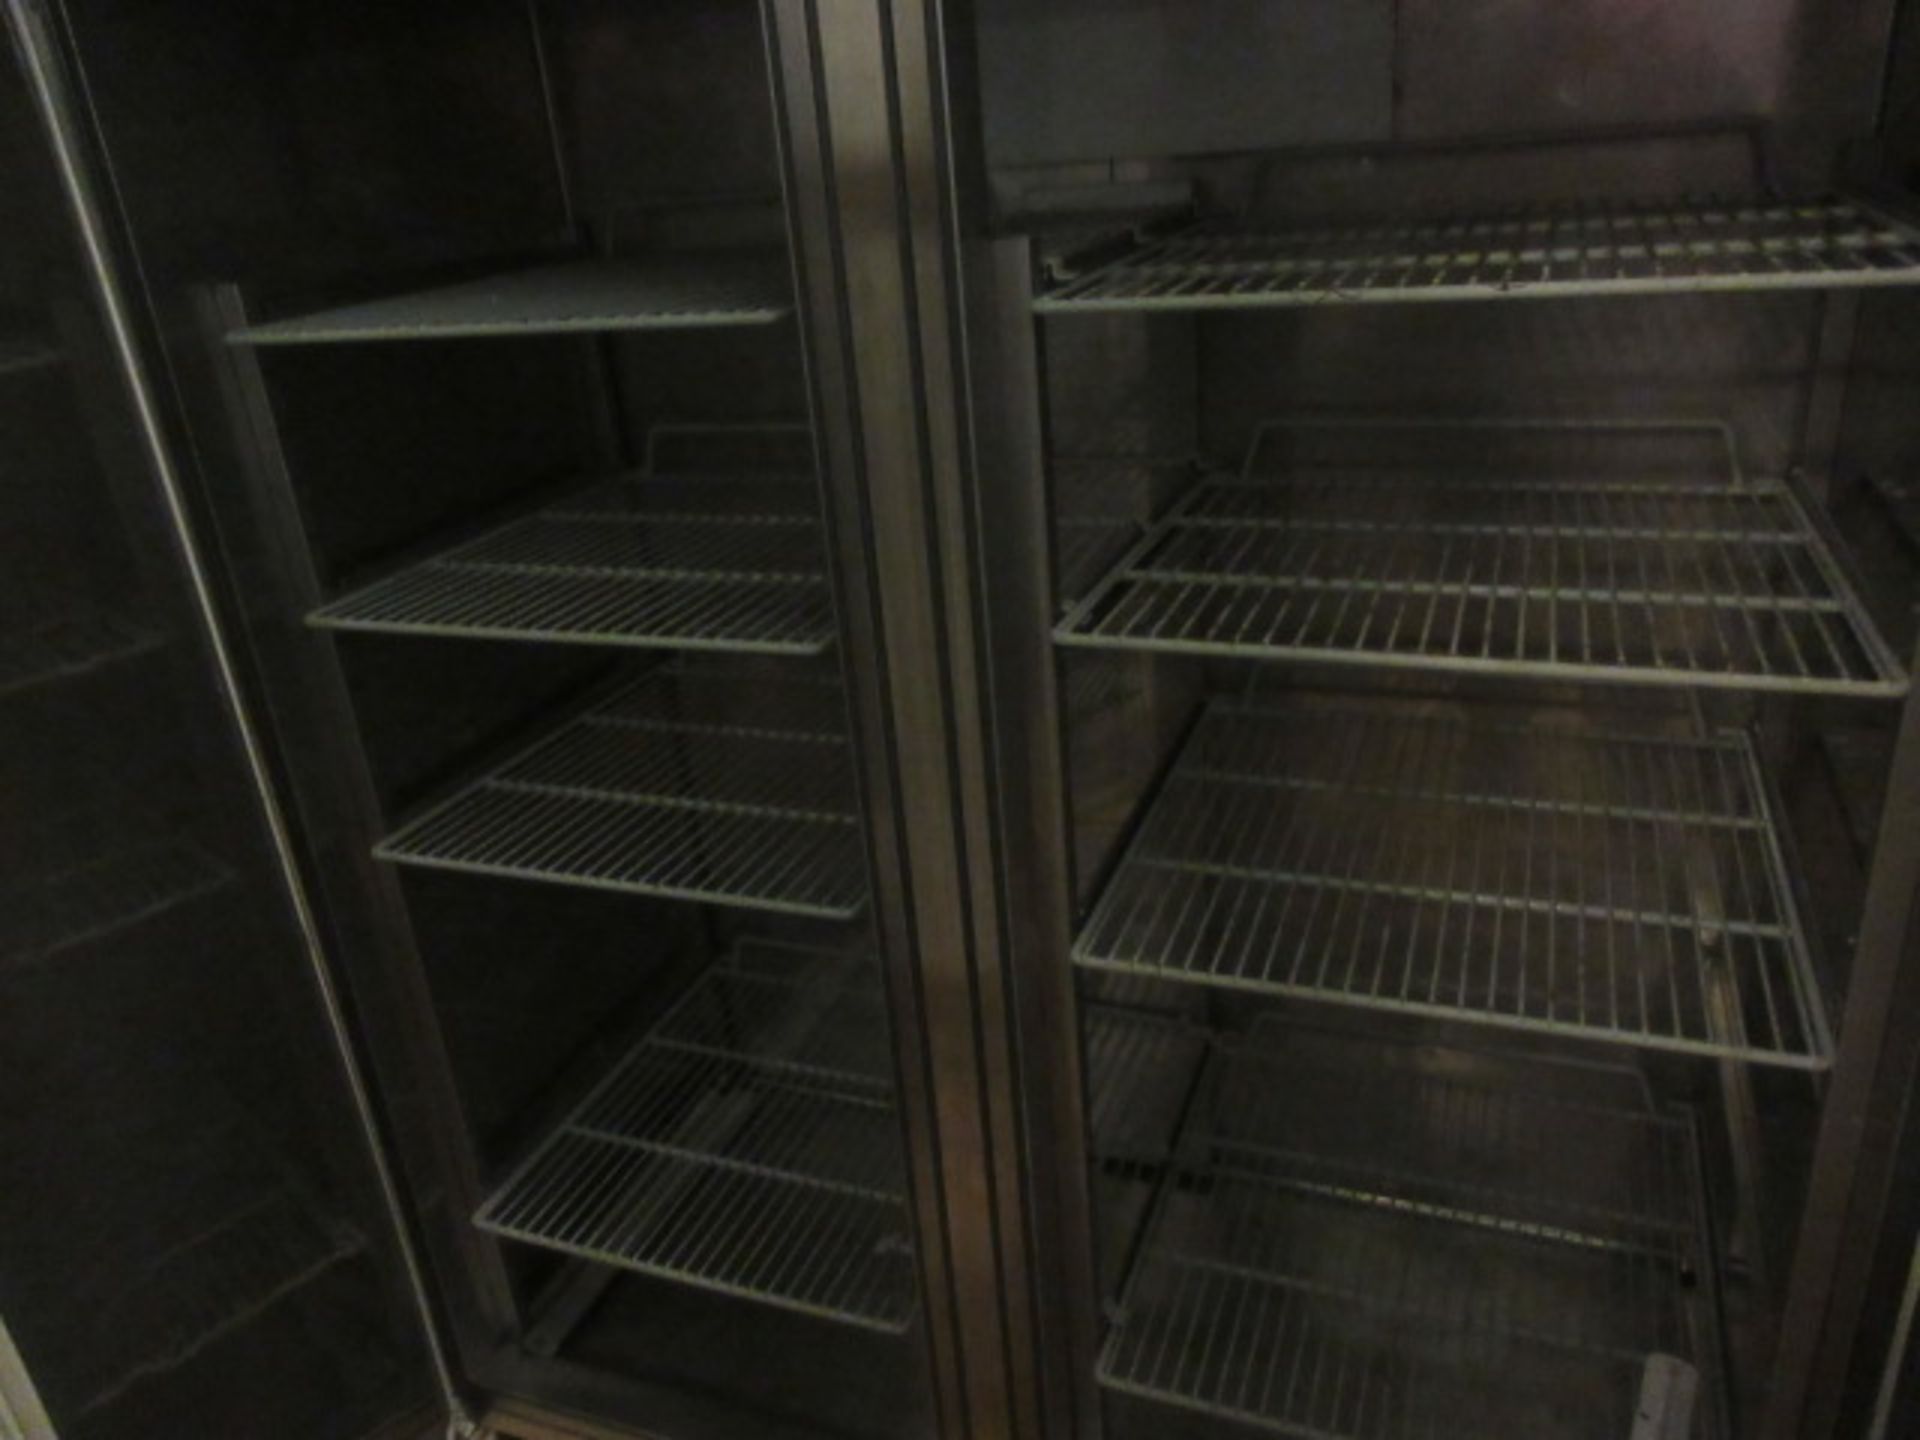 Levin Capricorn Double Door Stainless Steel Refrigerator Holehouse Road Main Canteen Ground Floor - Image 2 of 2